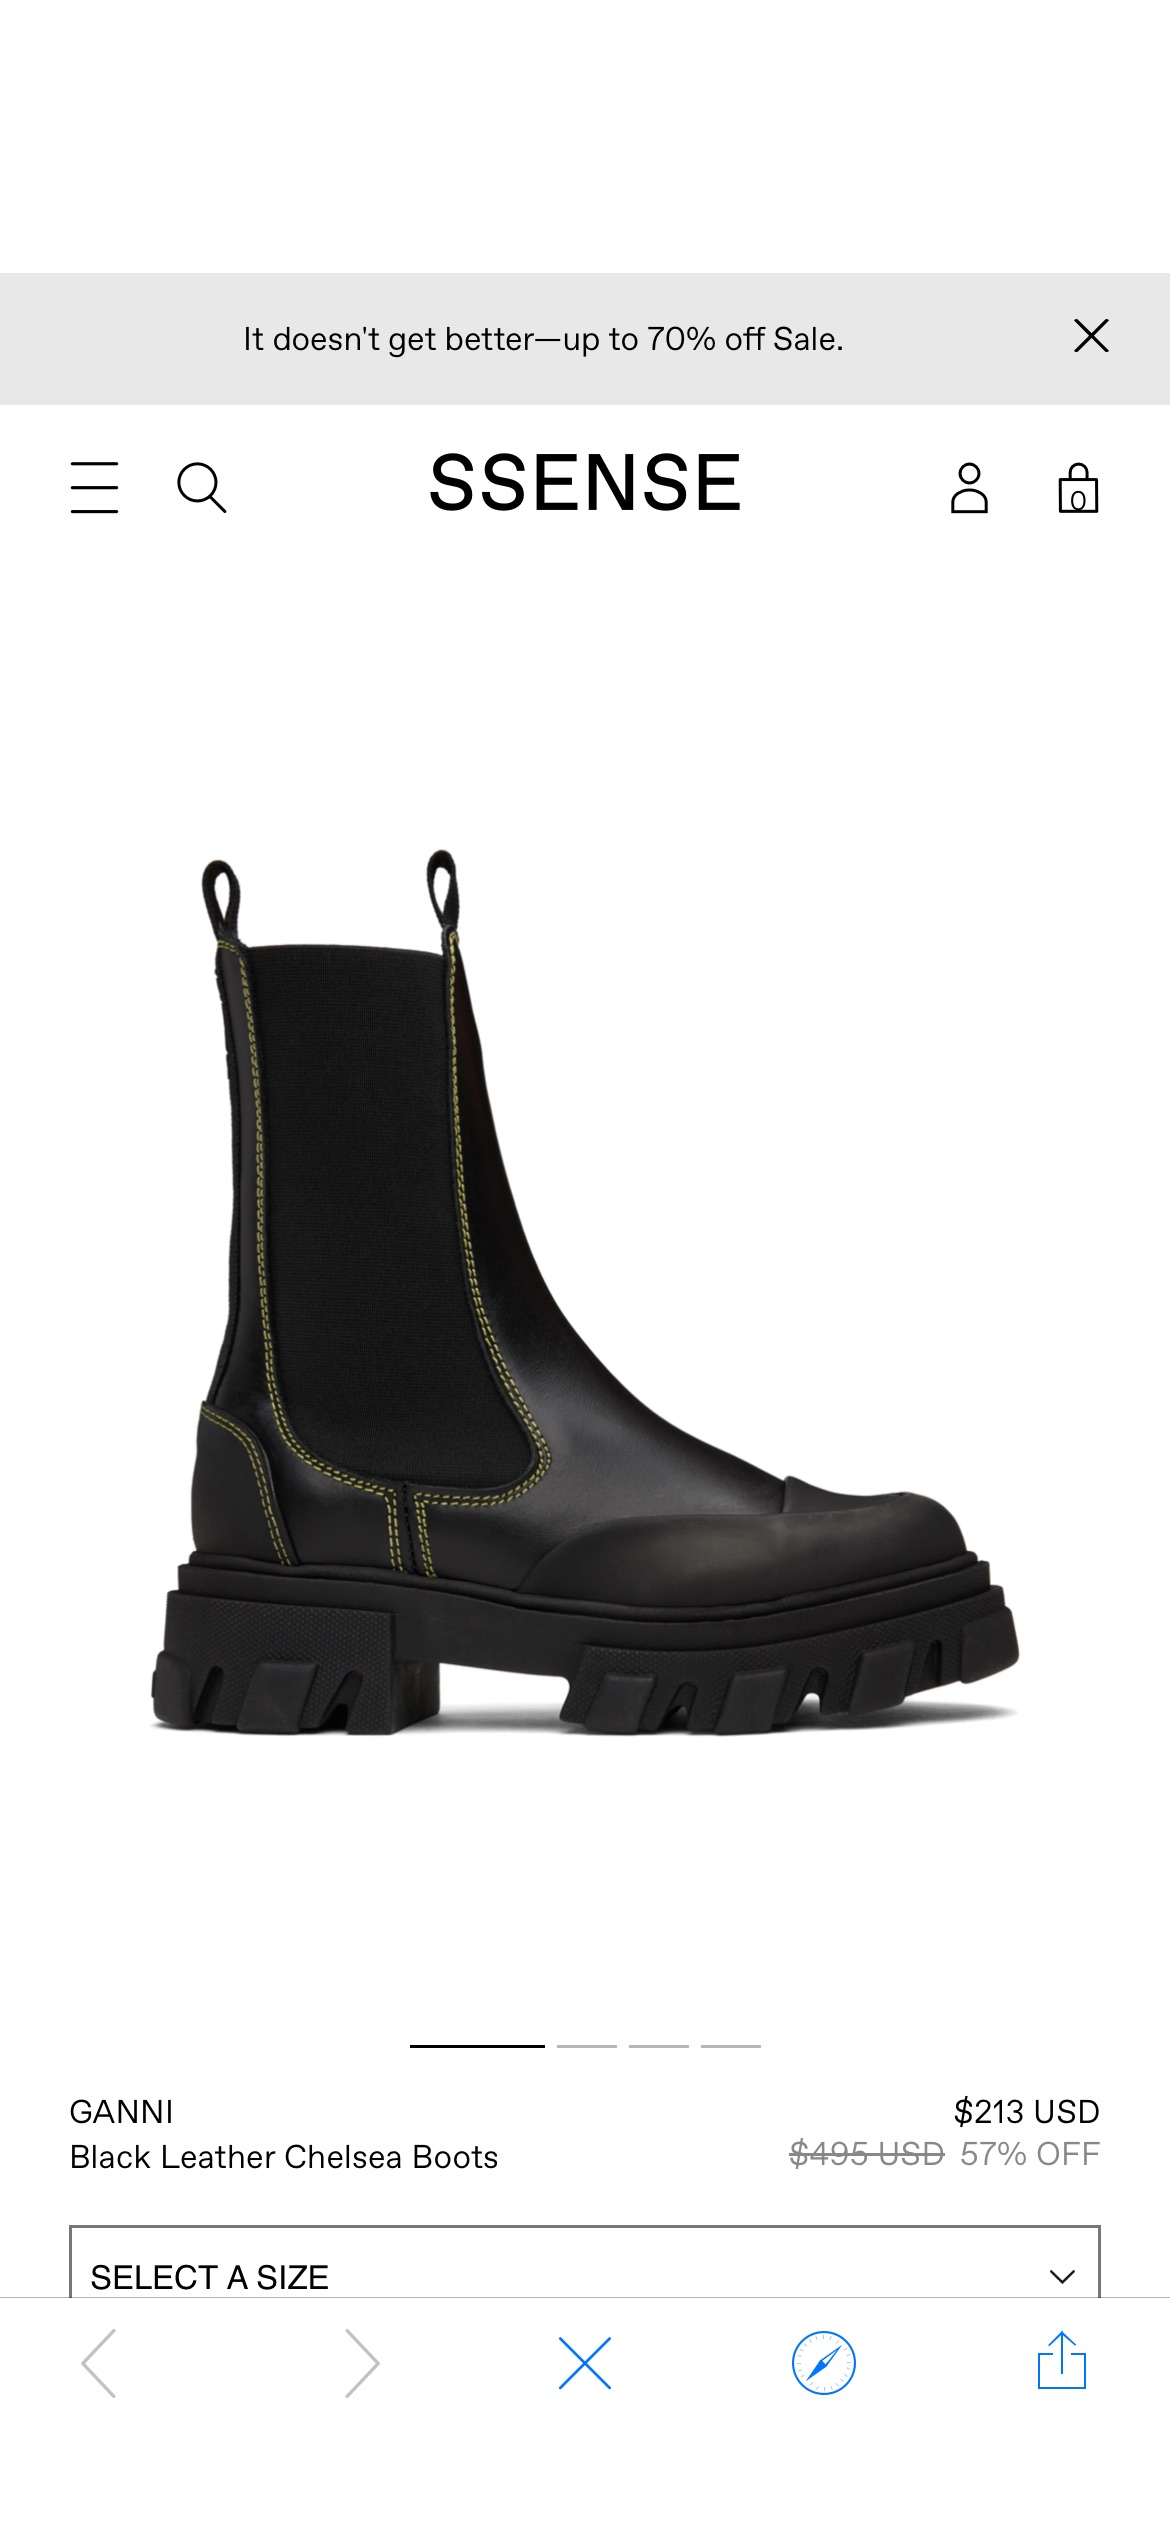 Black Leather Chelsea Boots by GANNI on Sale